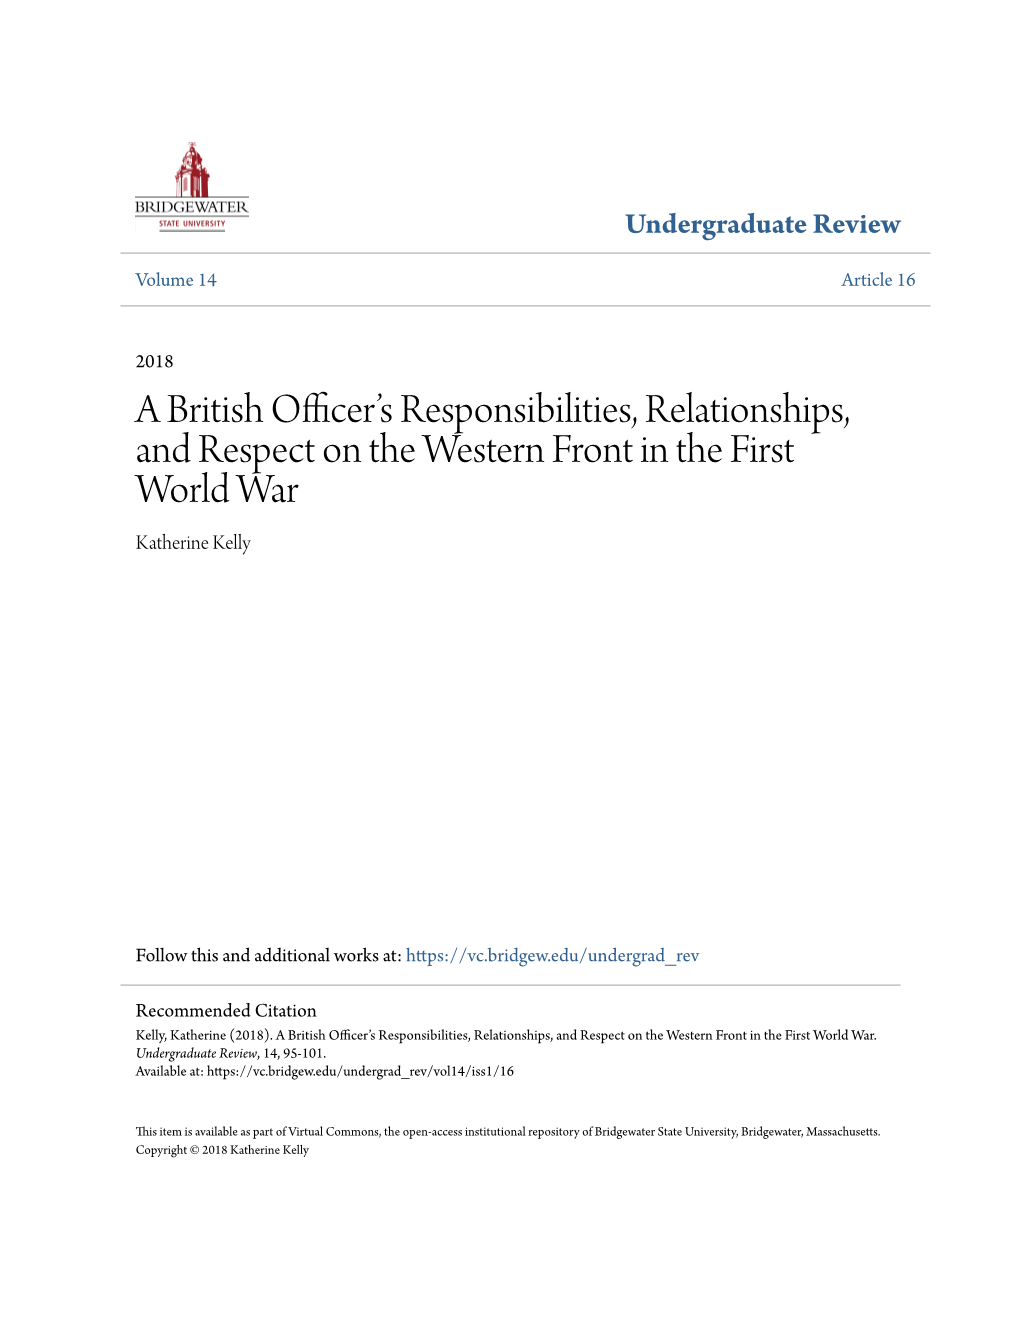 A British Officer's Responsibilities, Relationships, and Respect on the Western Front in the First World